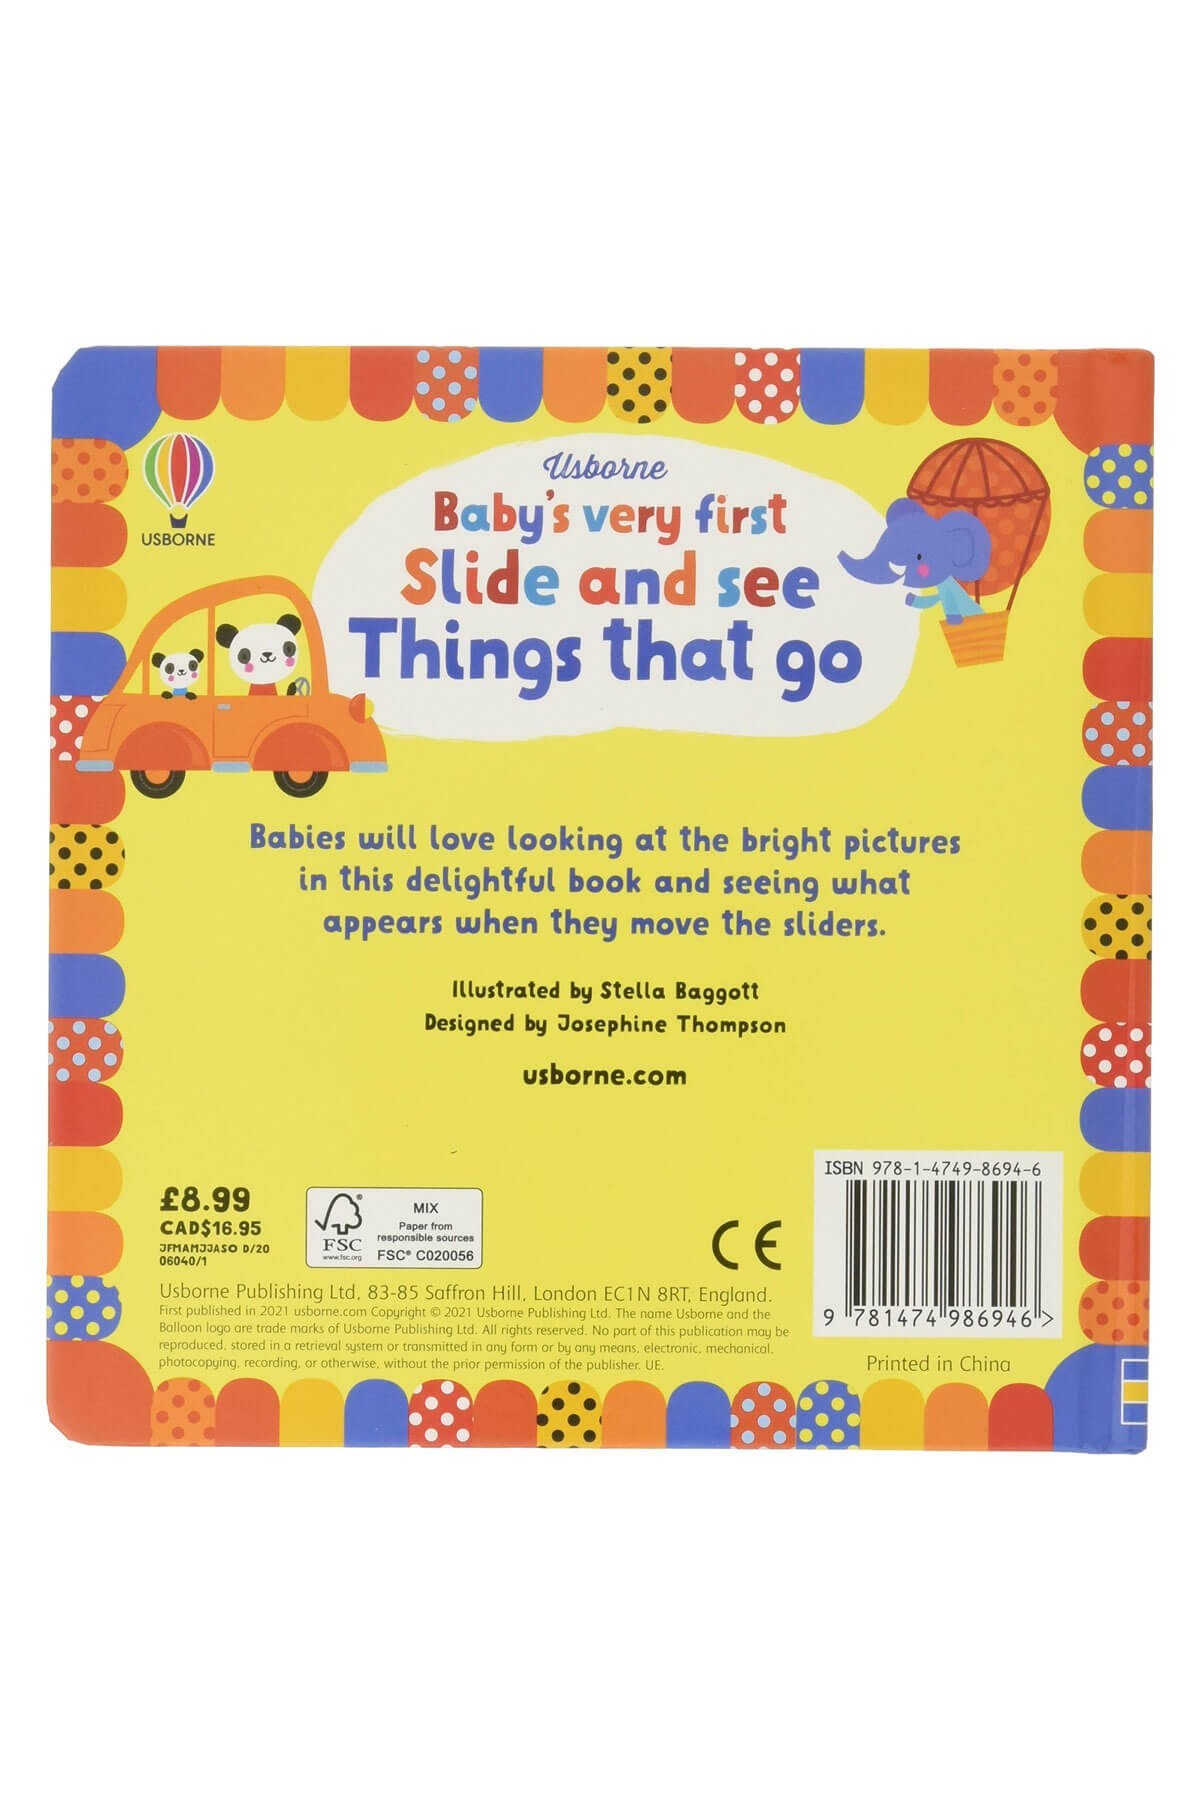 The Usborne Baby's Very First Slide and See Things That Go